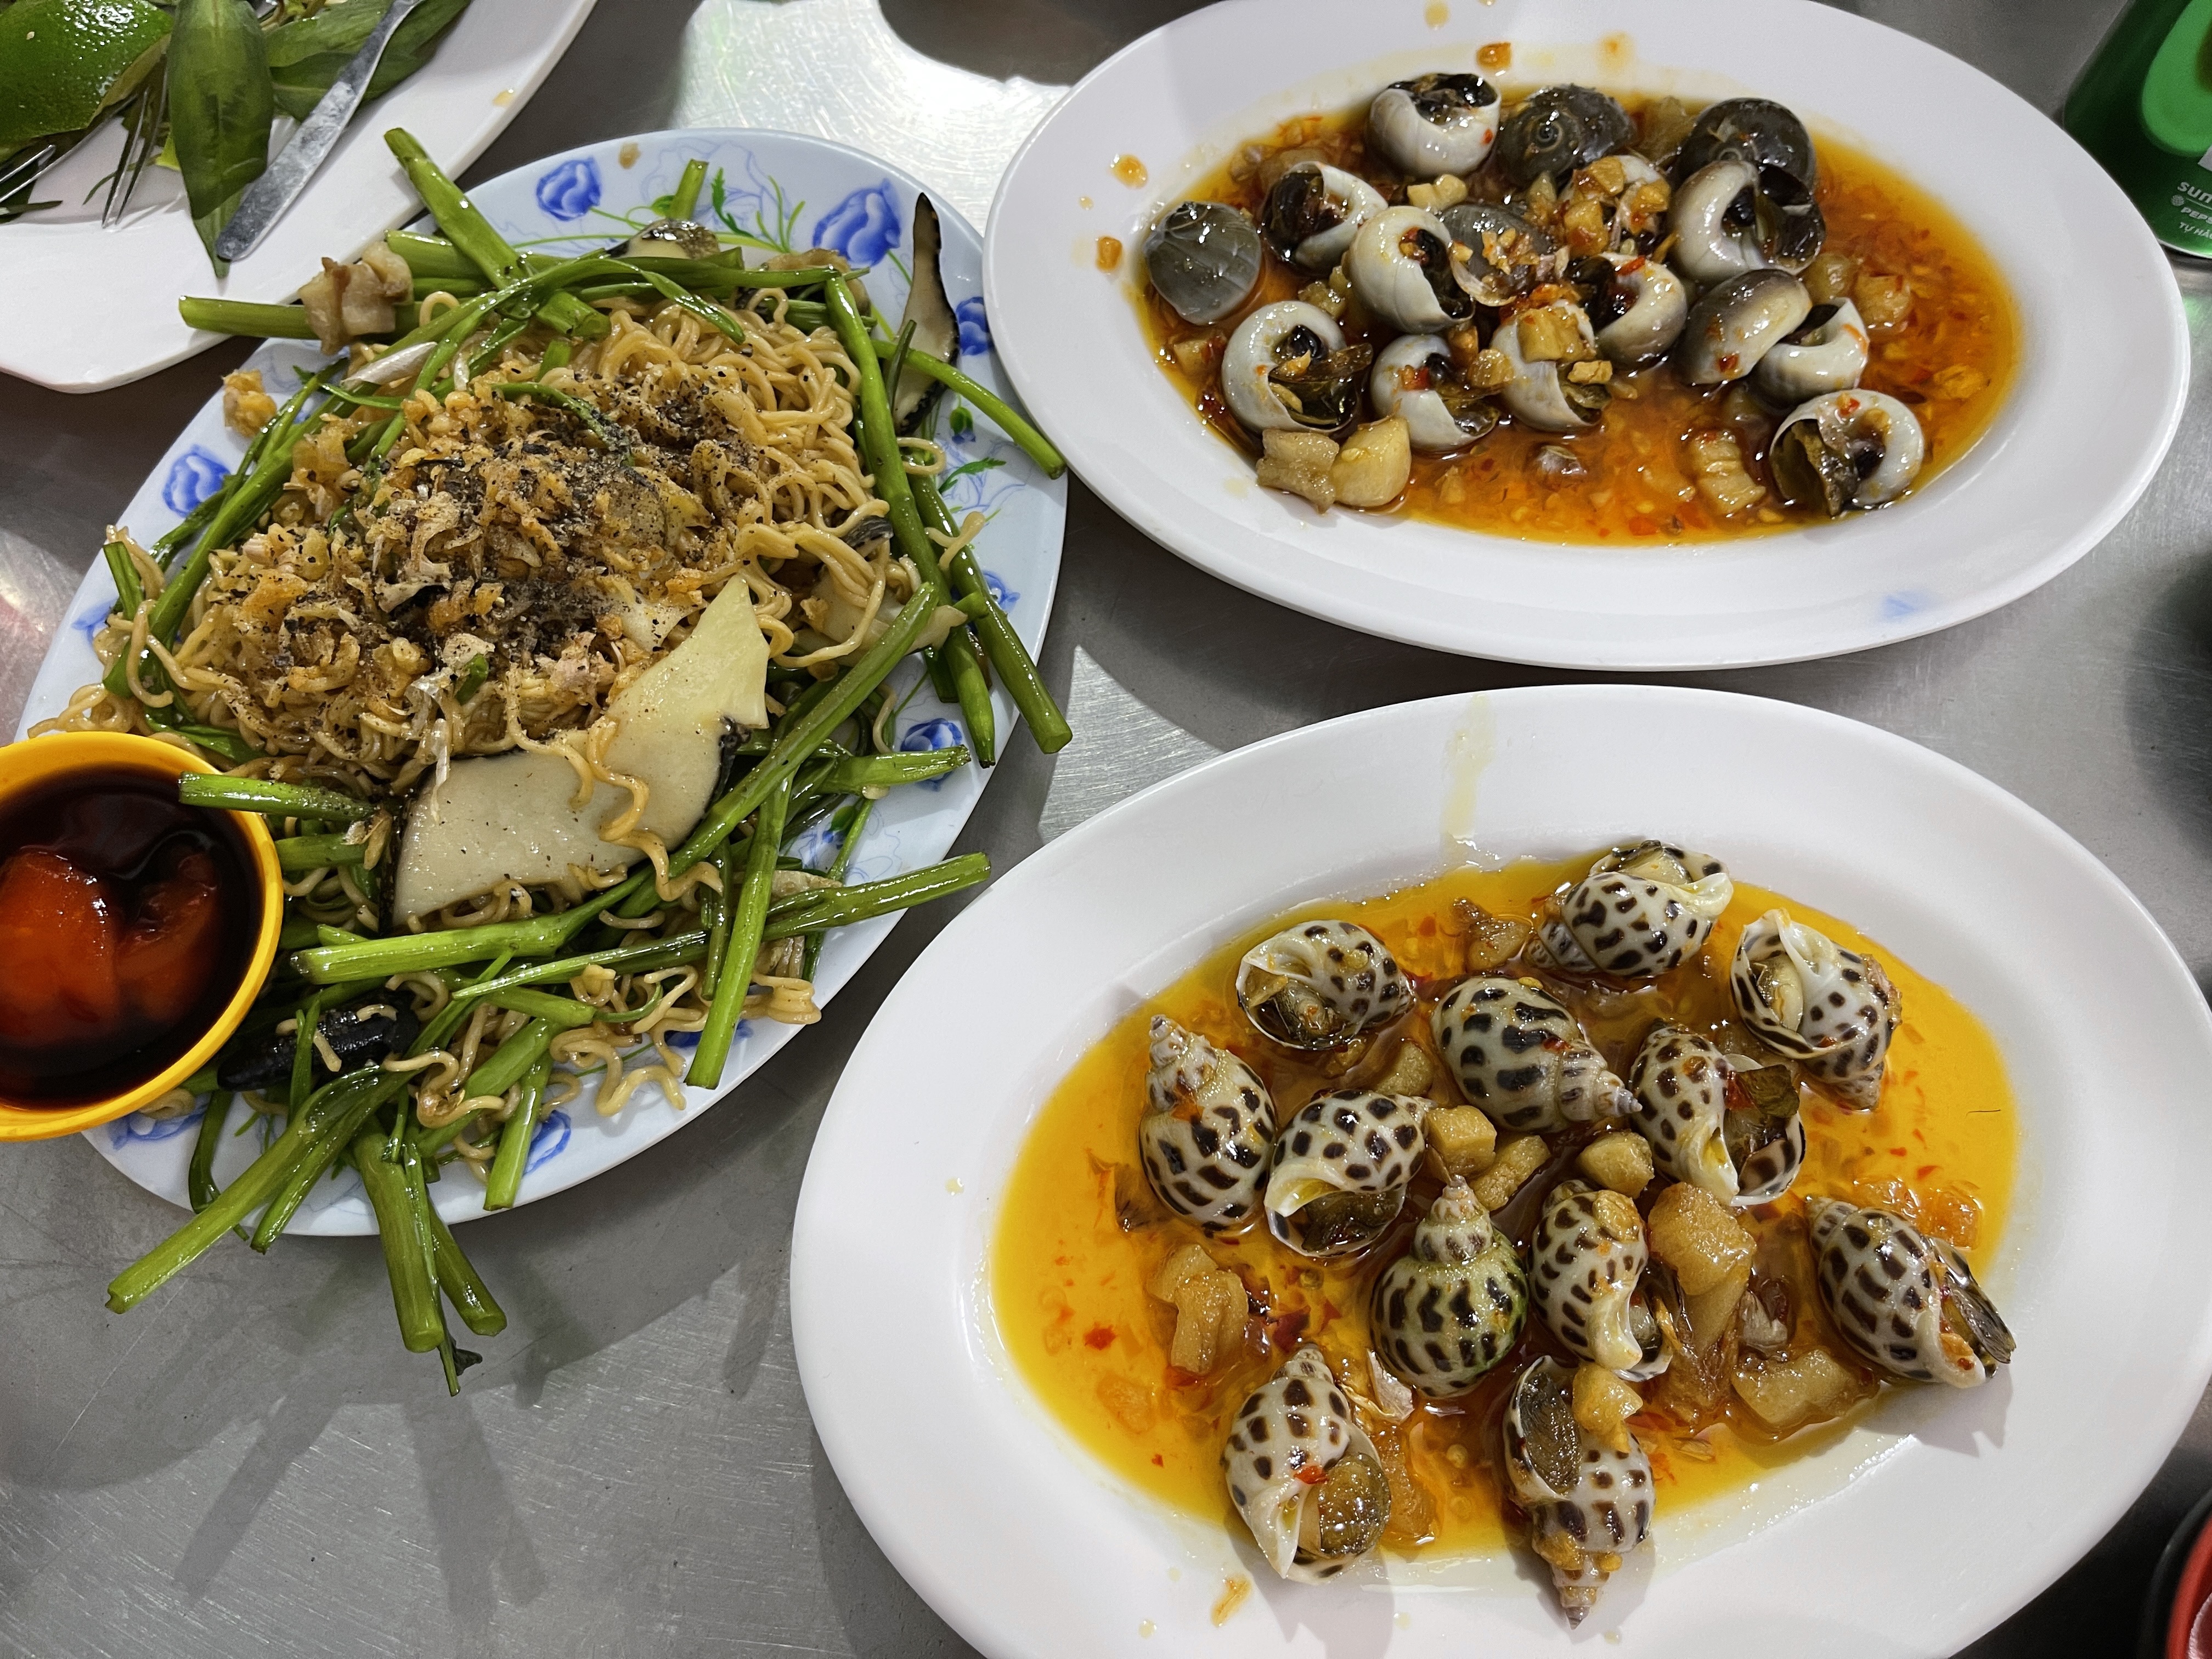 Shellfish dishes are served at an eatery in Phu Nhuan District, Ho Chi Minh City. Photo: Dong Nguyen / Tuoi Tre News